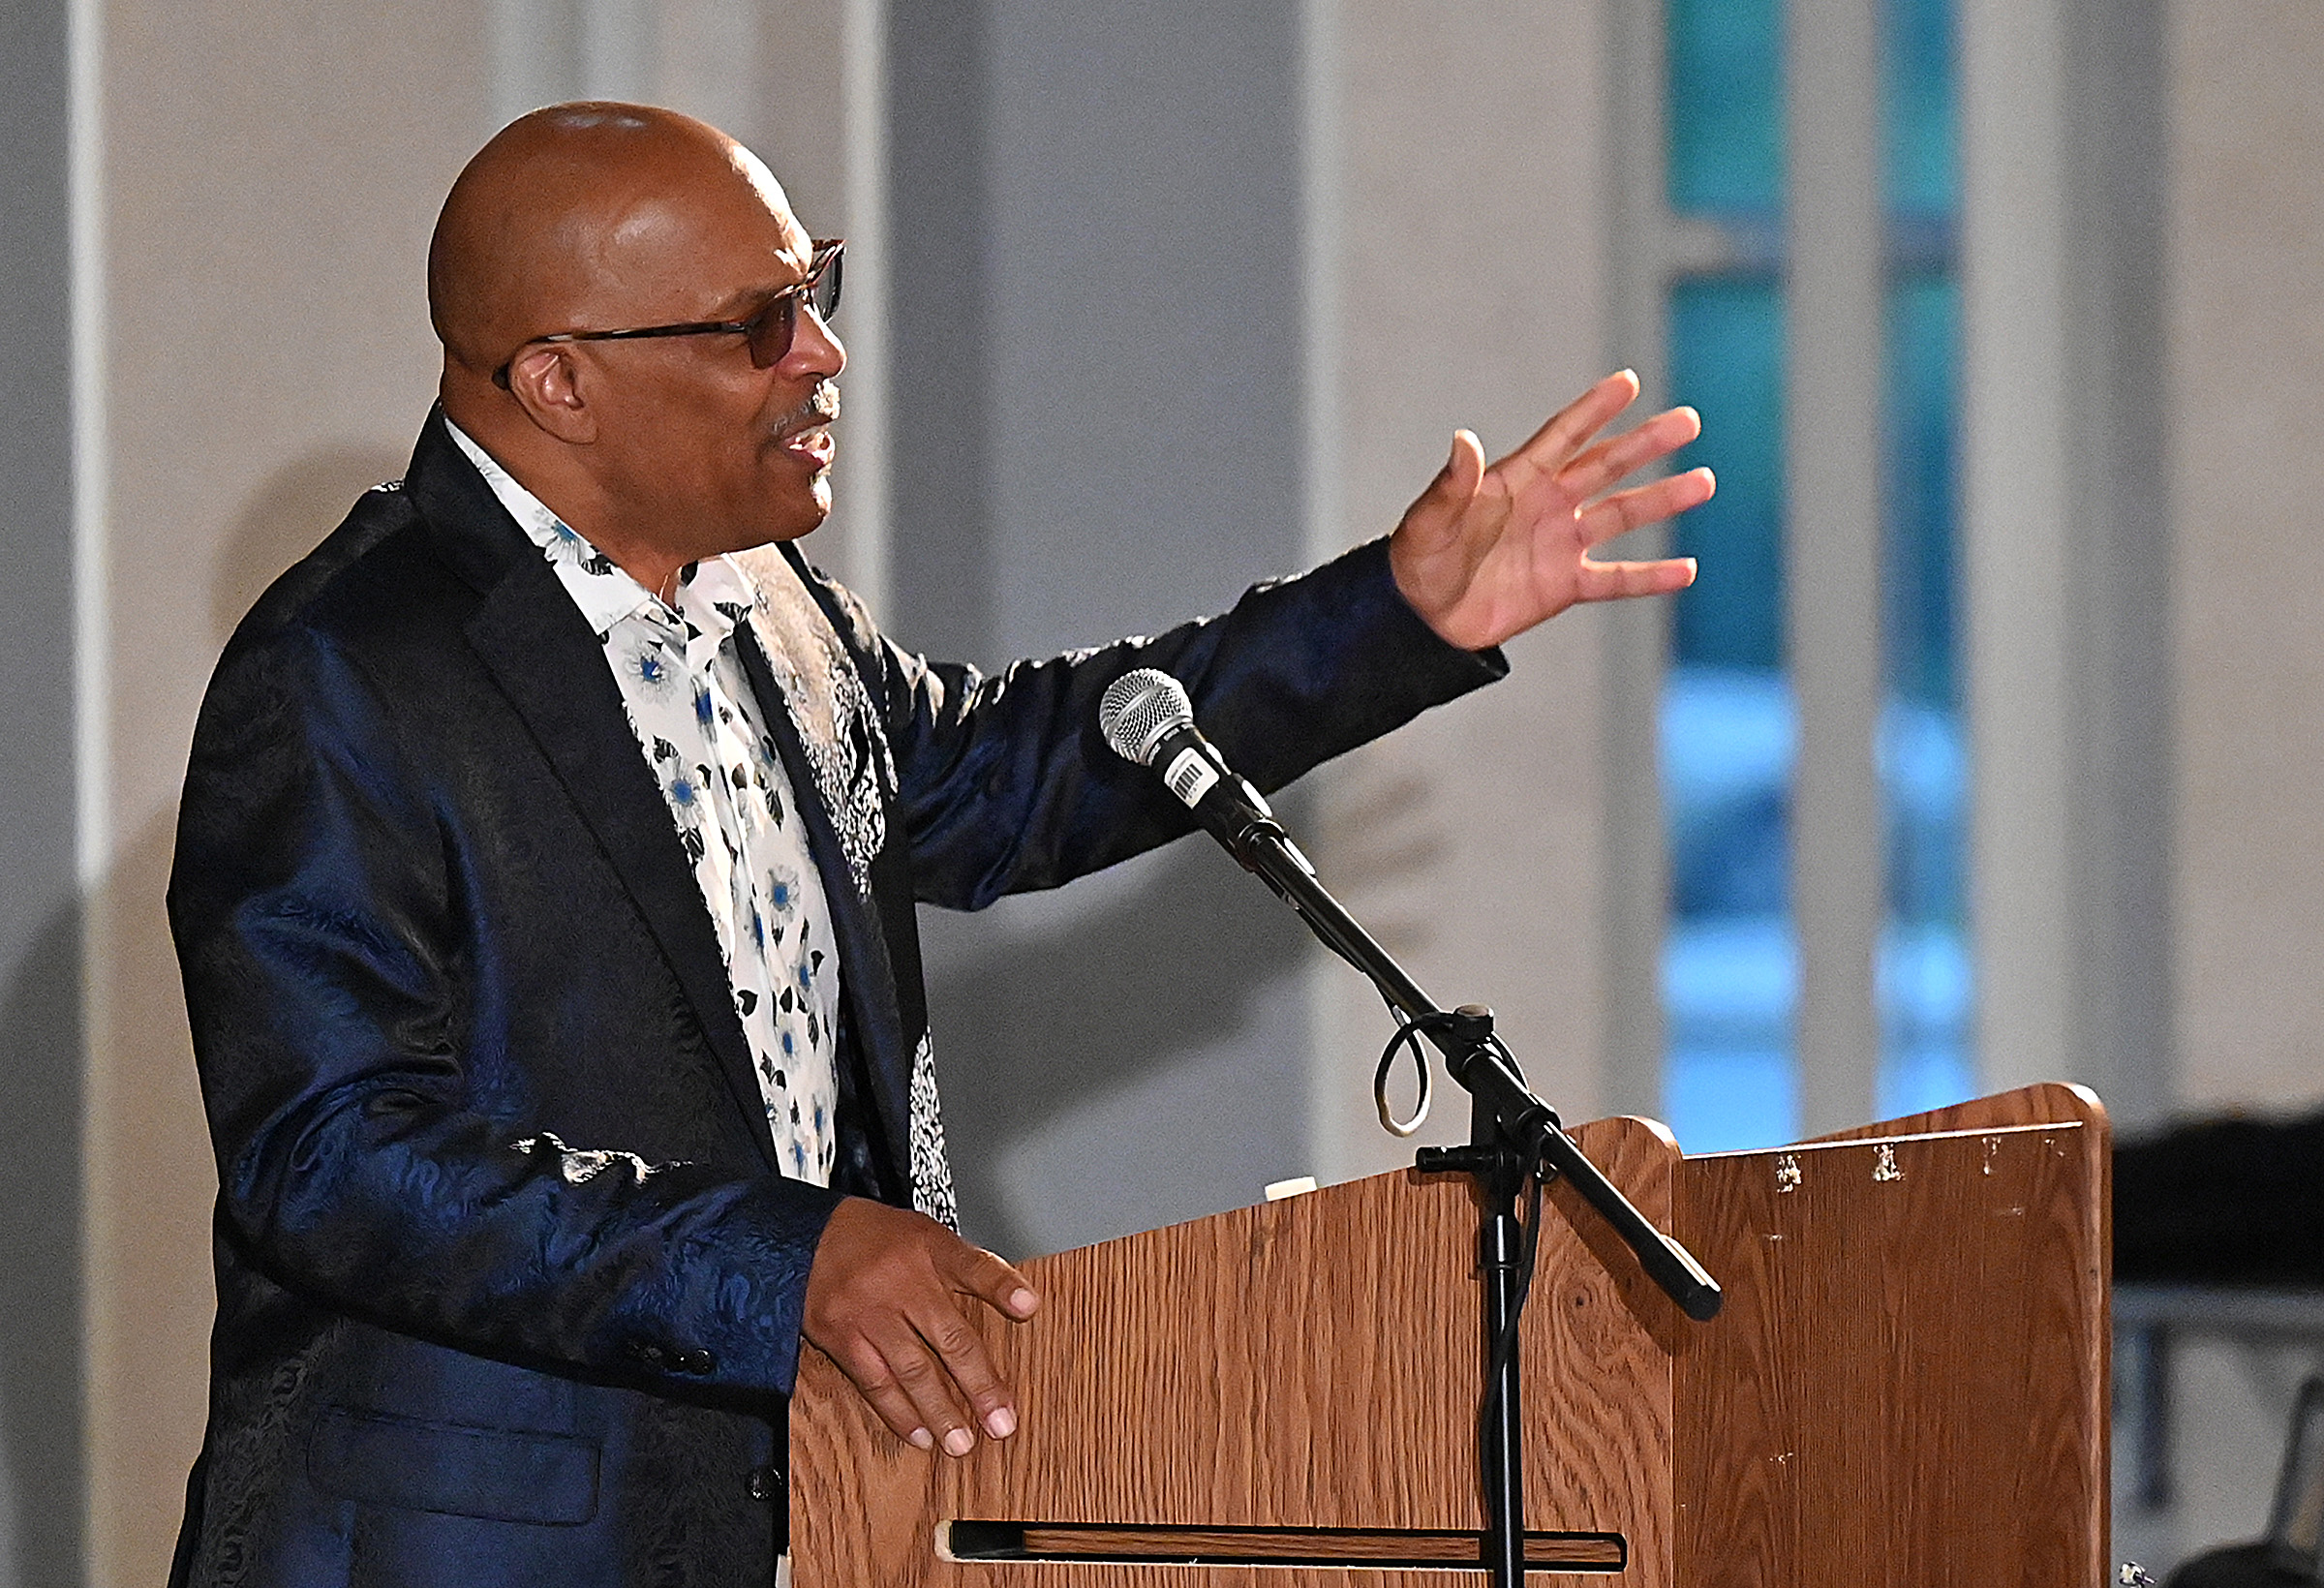 Keynote Speaker, Ike Dixon, shares his experience with drug addictionat the 9th Annual Drug Overdose and Prevention Vigil Tuesday at Portico at St. John in Westminster. (Jeffrey F. Bill/Staff photo)